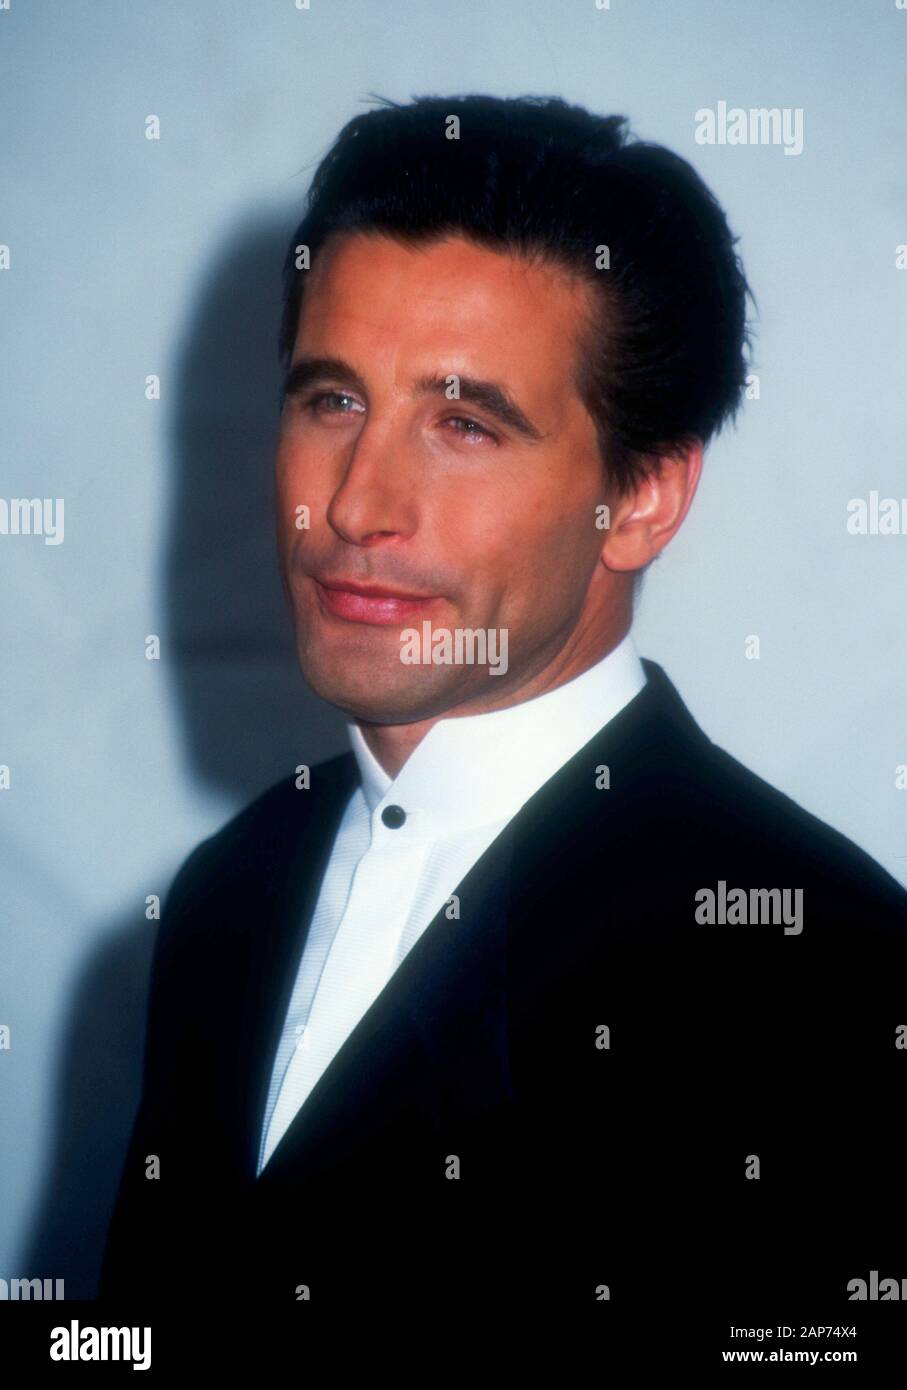 Los Angeles, California, USA 3rd June 1995 Actor William Baldwin attends the First Annual Blockbuster Entertainment Awards on June 3, 1995 at the Pantages Theatre in Los Angeles, California, USA. Photo by Barry King/Alamy Stock Photo Stock Photo